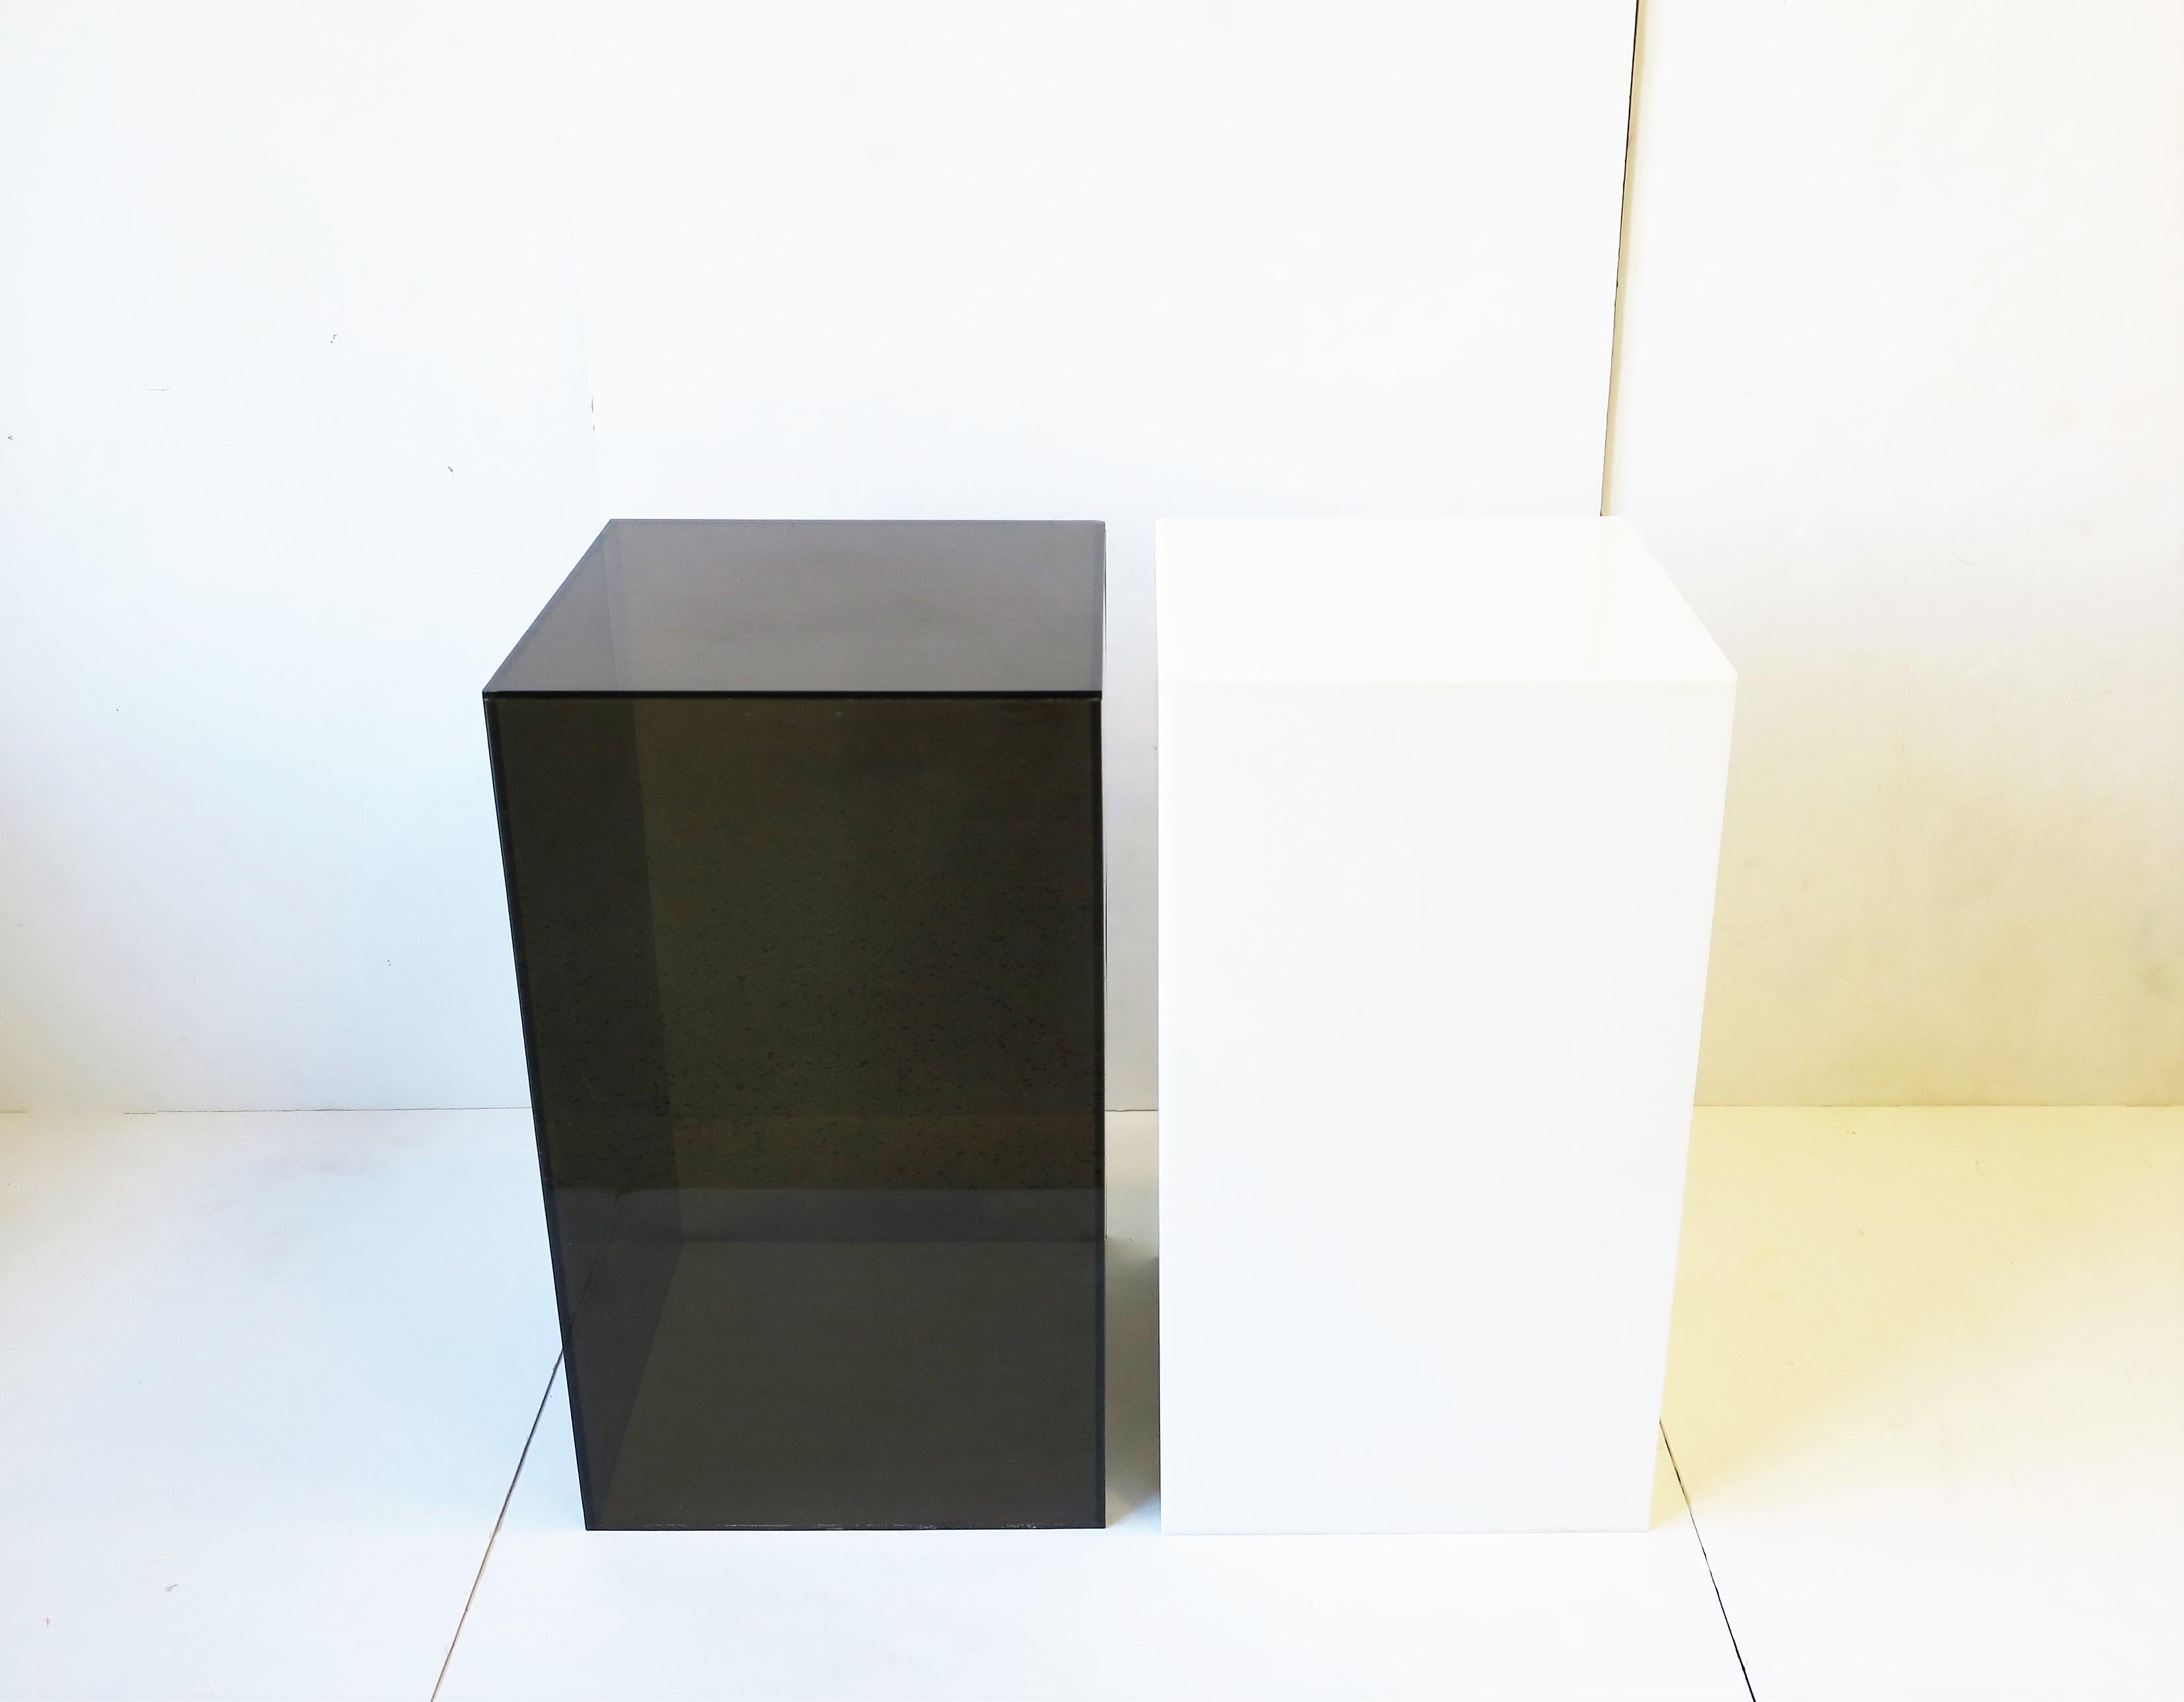 Black Acrylic Pedestal Column Stand or End Table 4